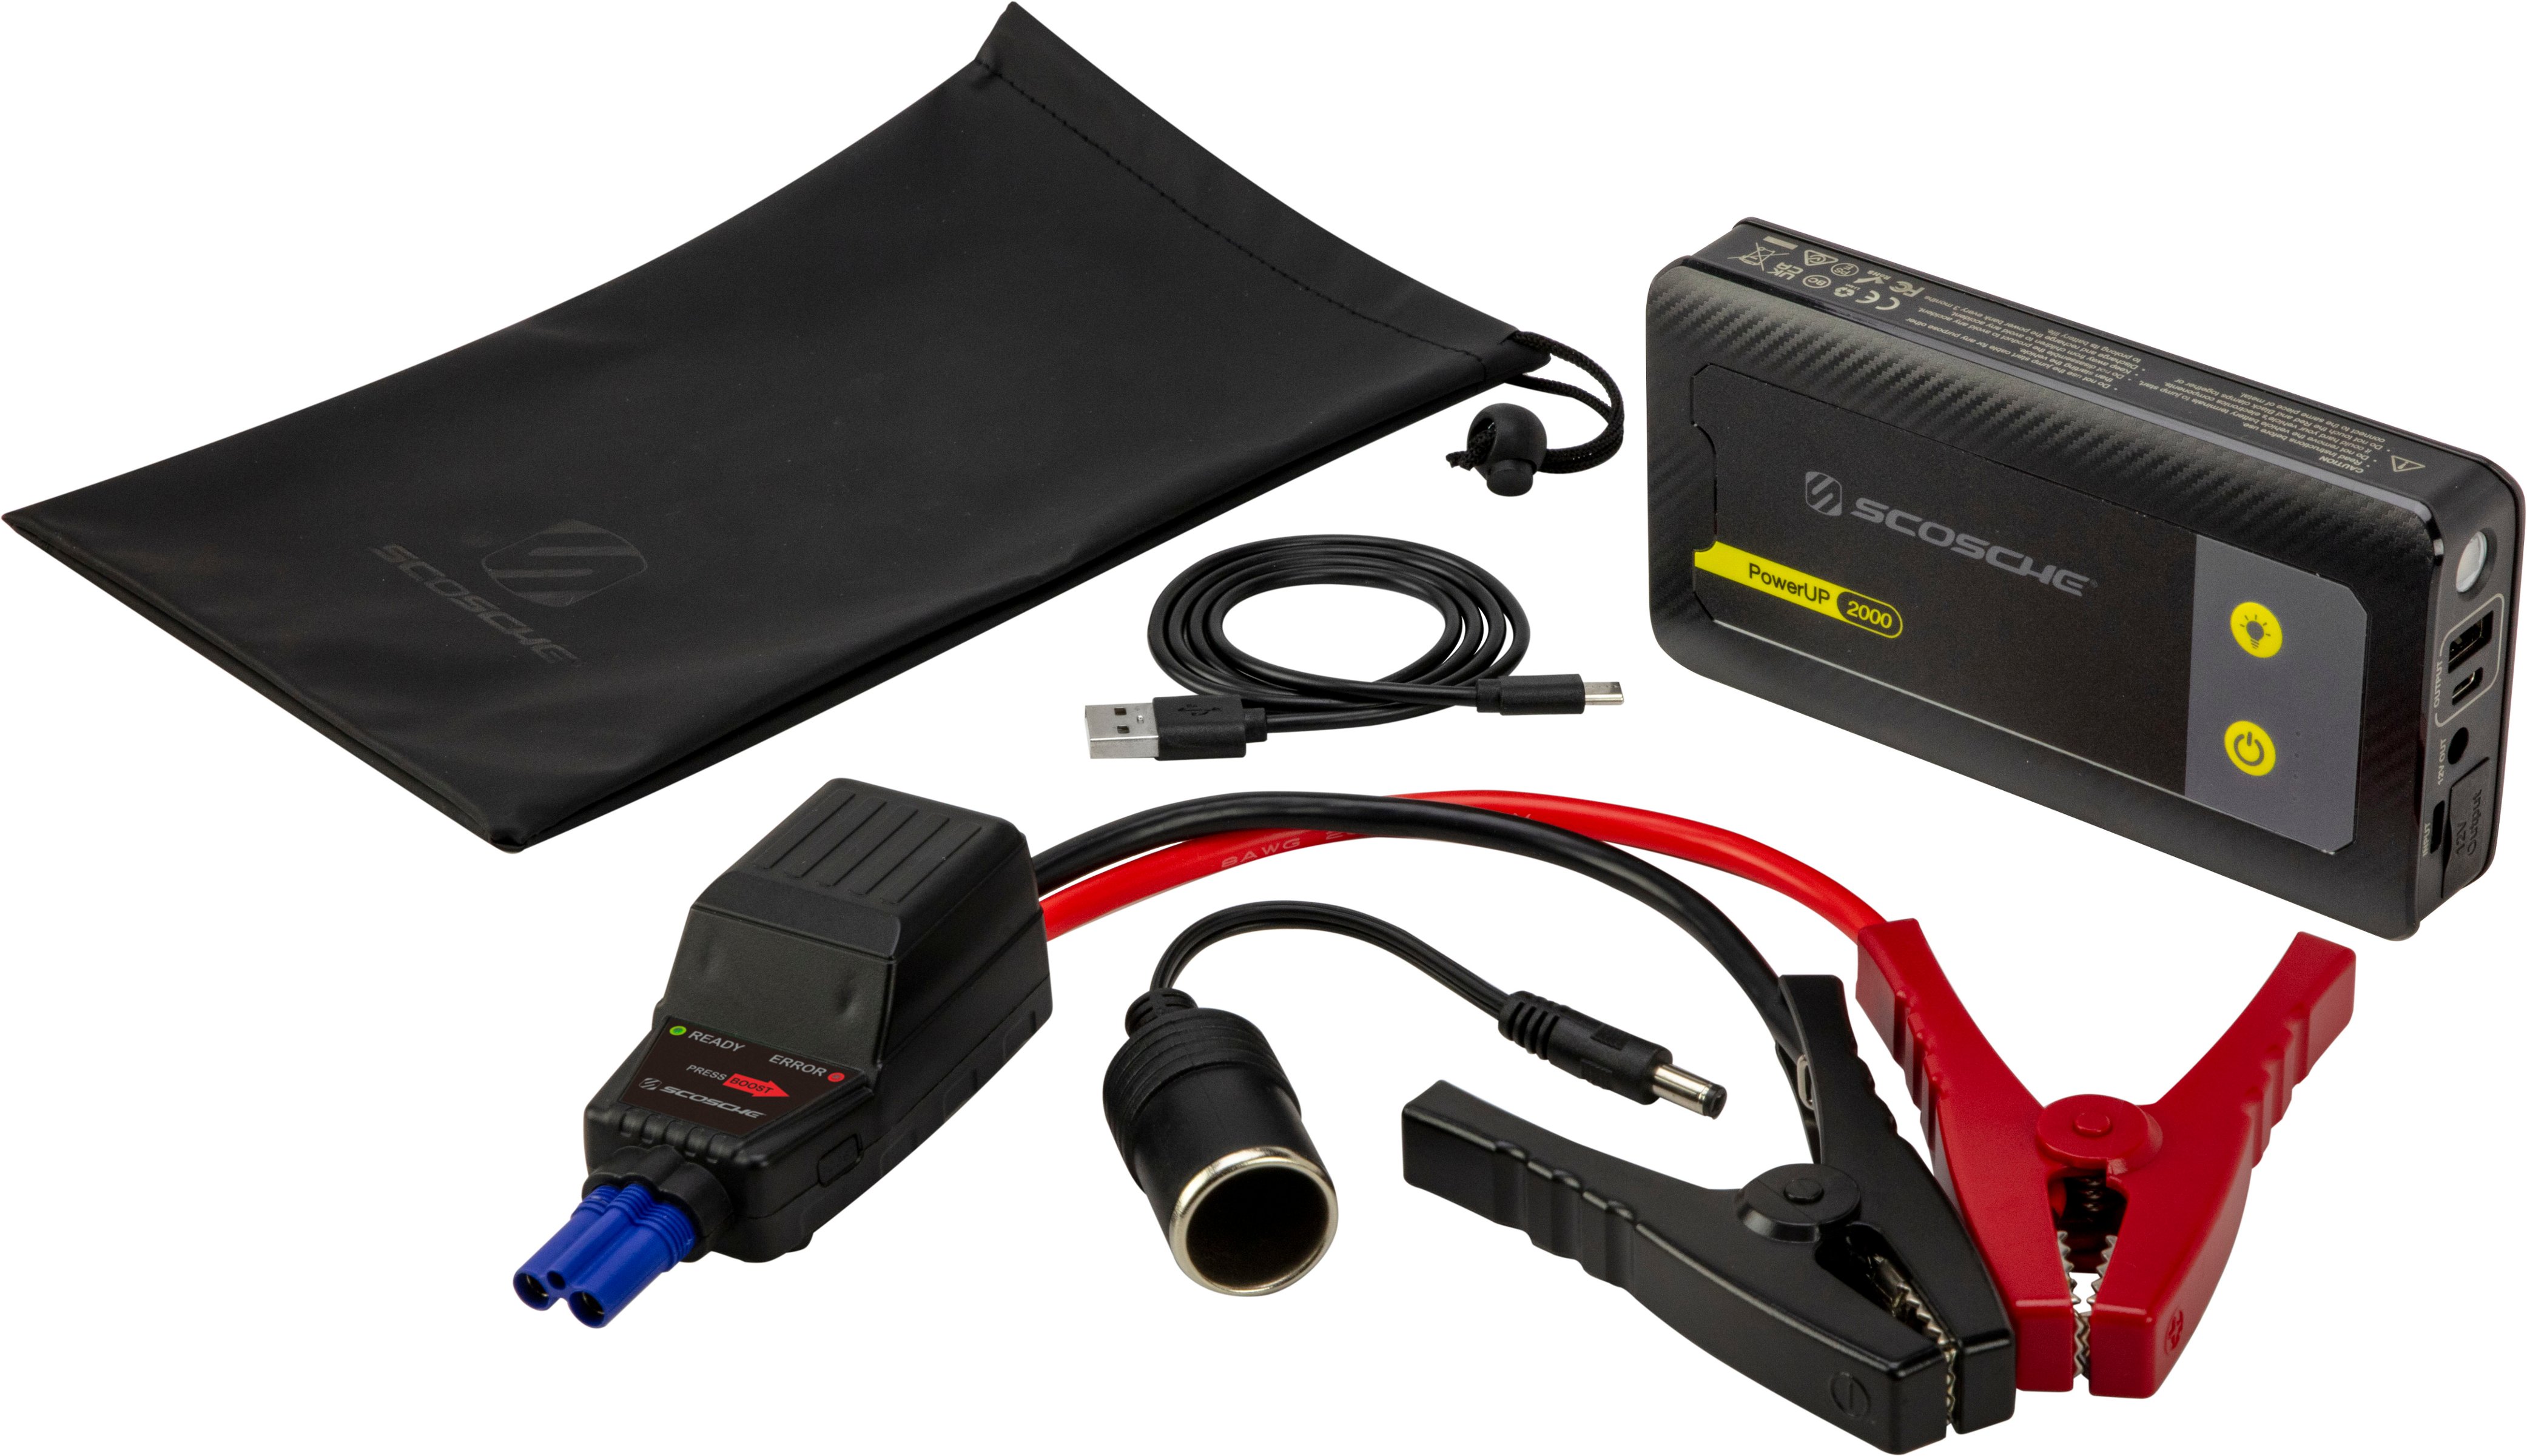 Angle View: Scosche - PowerUp 2000 Portable Car Jump Starter with USB Power Bank and LED Flashlight - Black